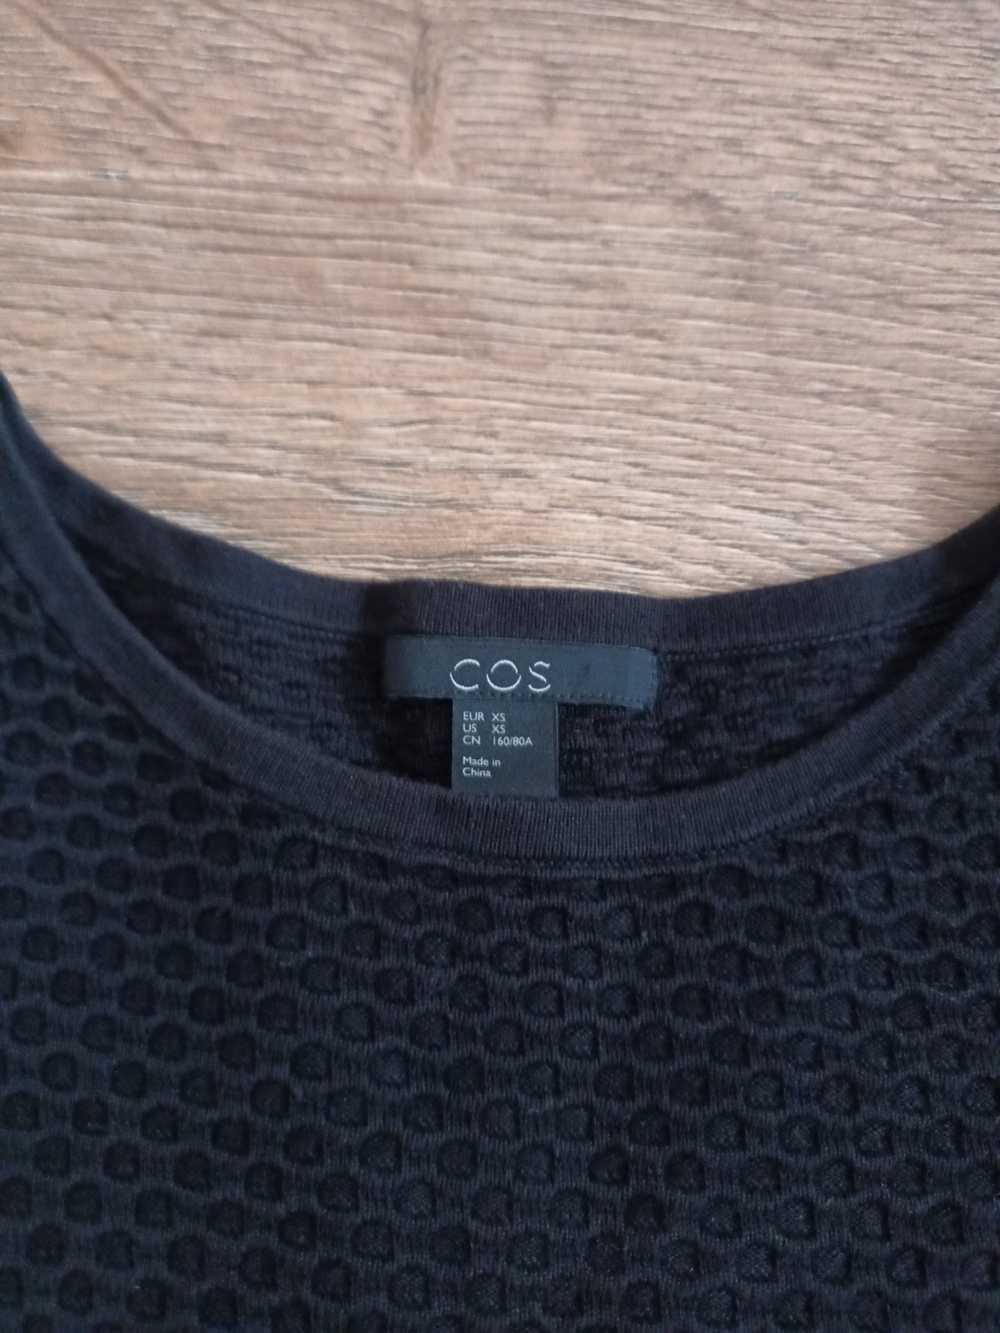 Cos COS Womens Waffle Knit Black Sweater Size XS - image 2